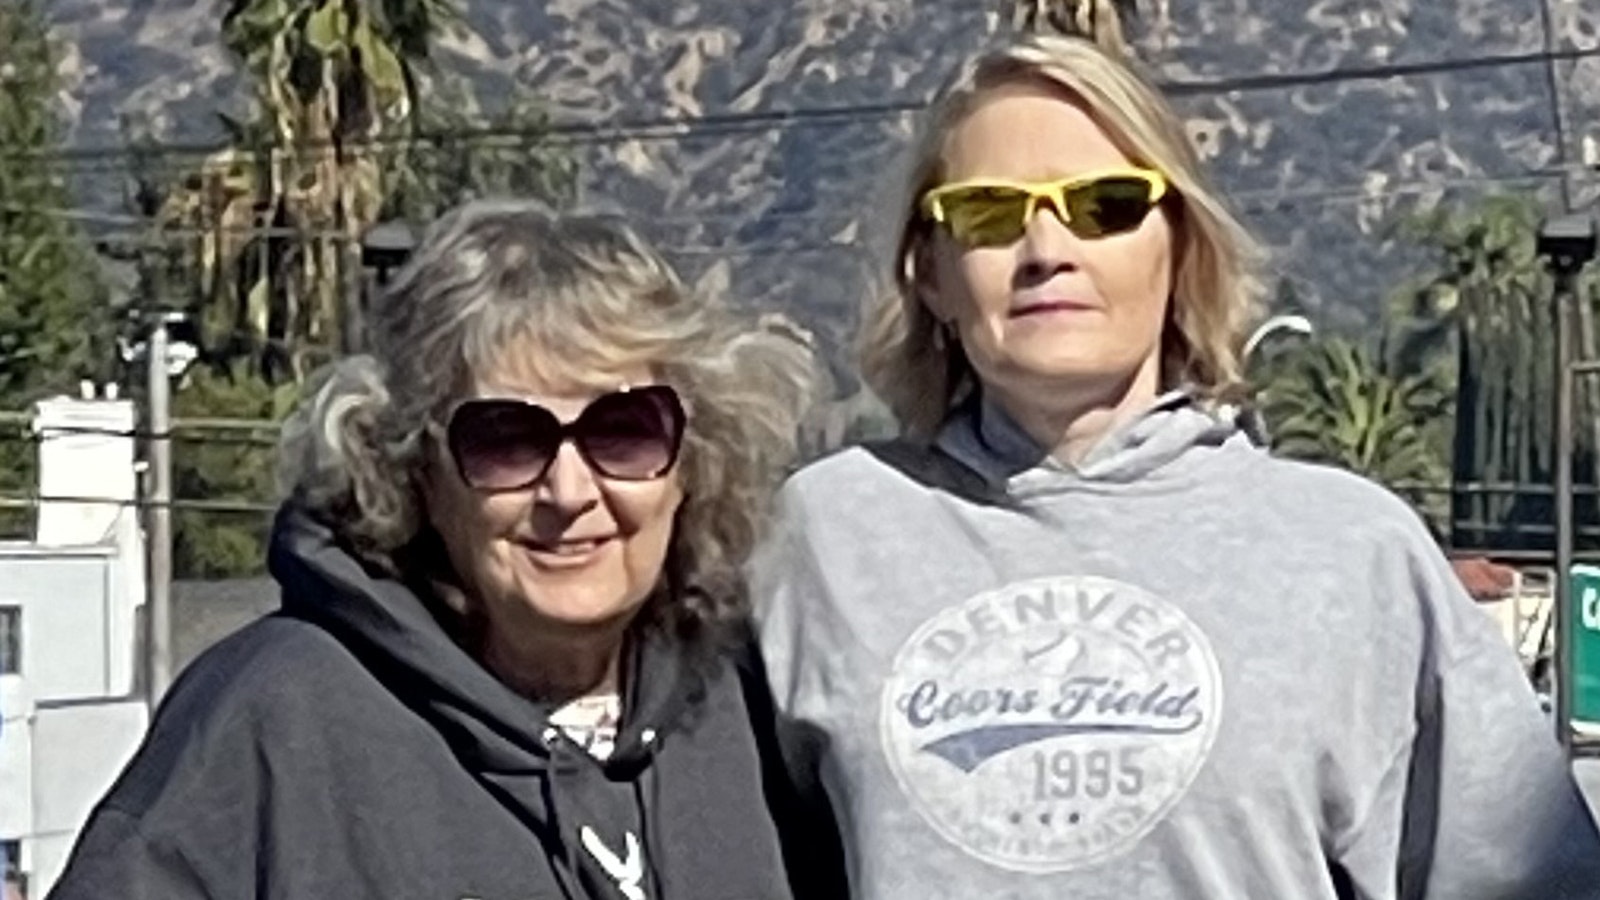 Jenn Green and her mother Cynthia Updike in California during the fall 2022 for tests before getting on the transplant list.